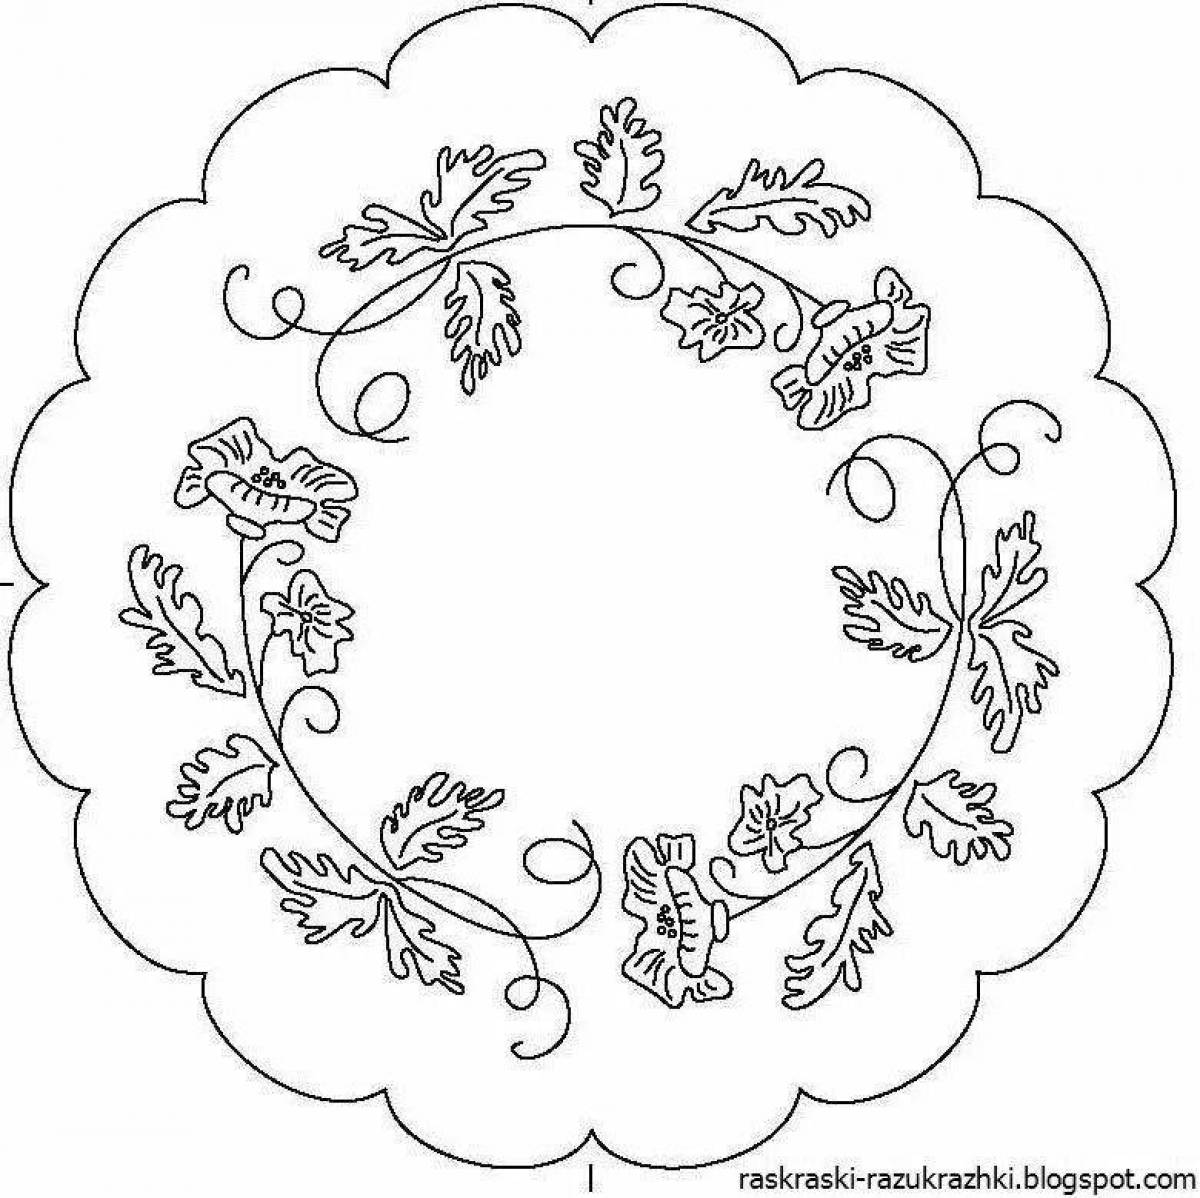 Children's tablecloth coloring book